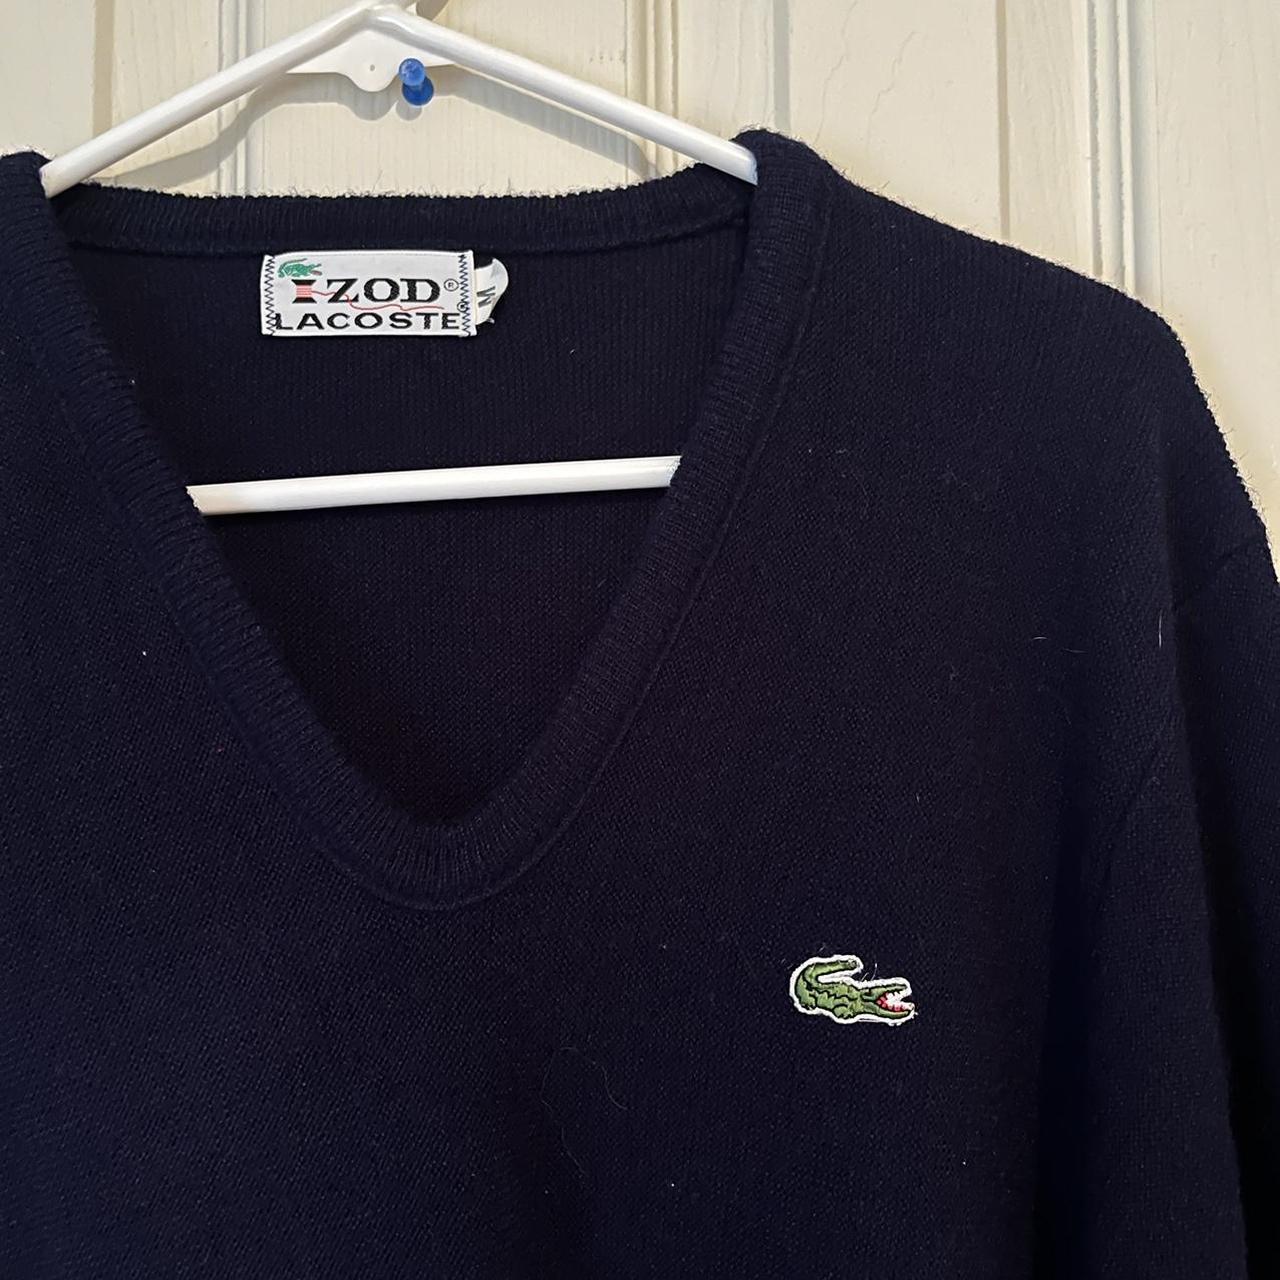 Lacoste Men's Navy and Blue Jumper